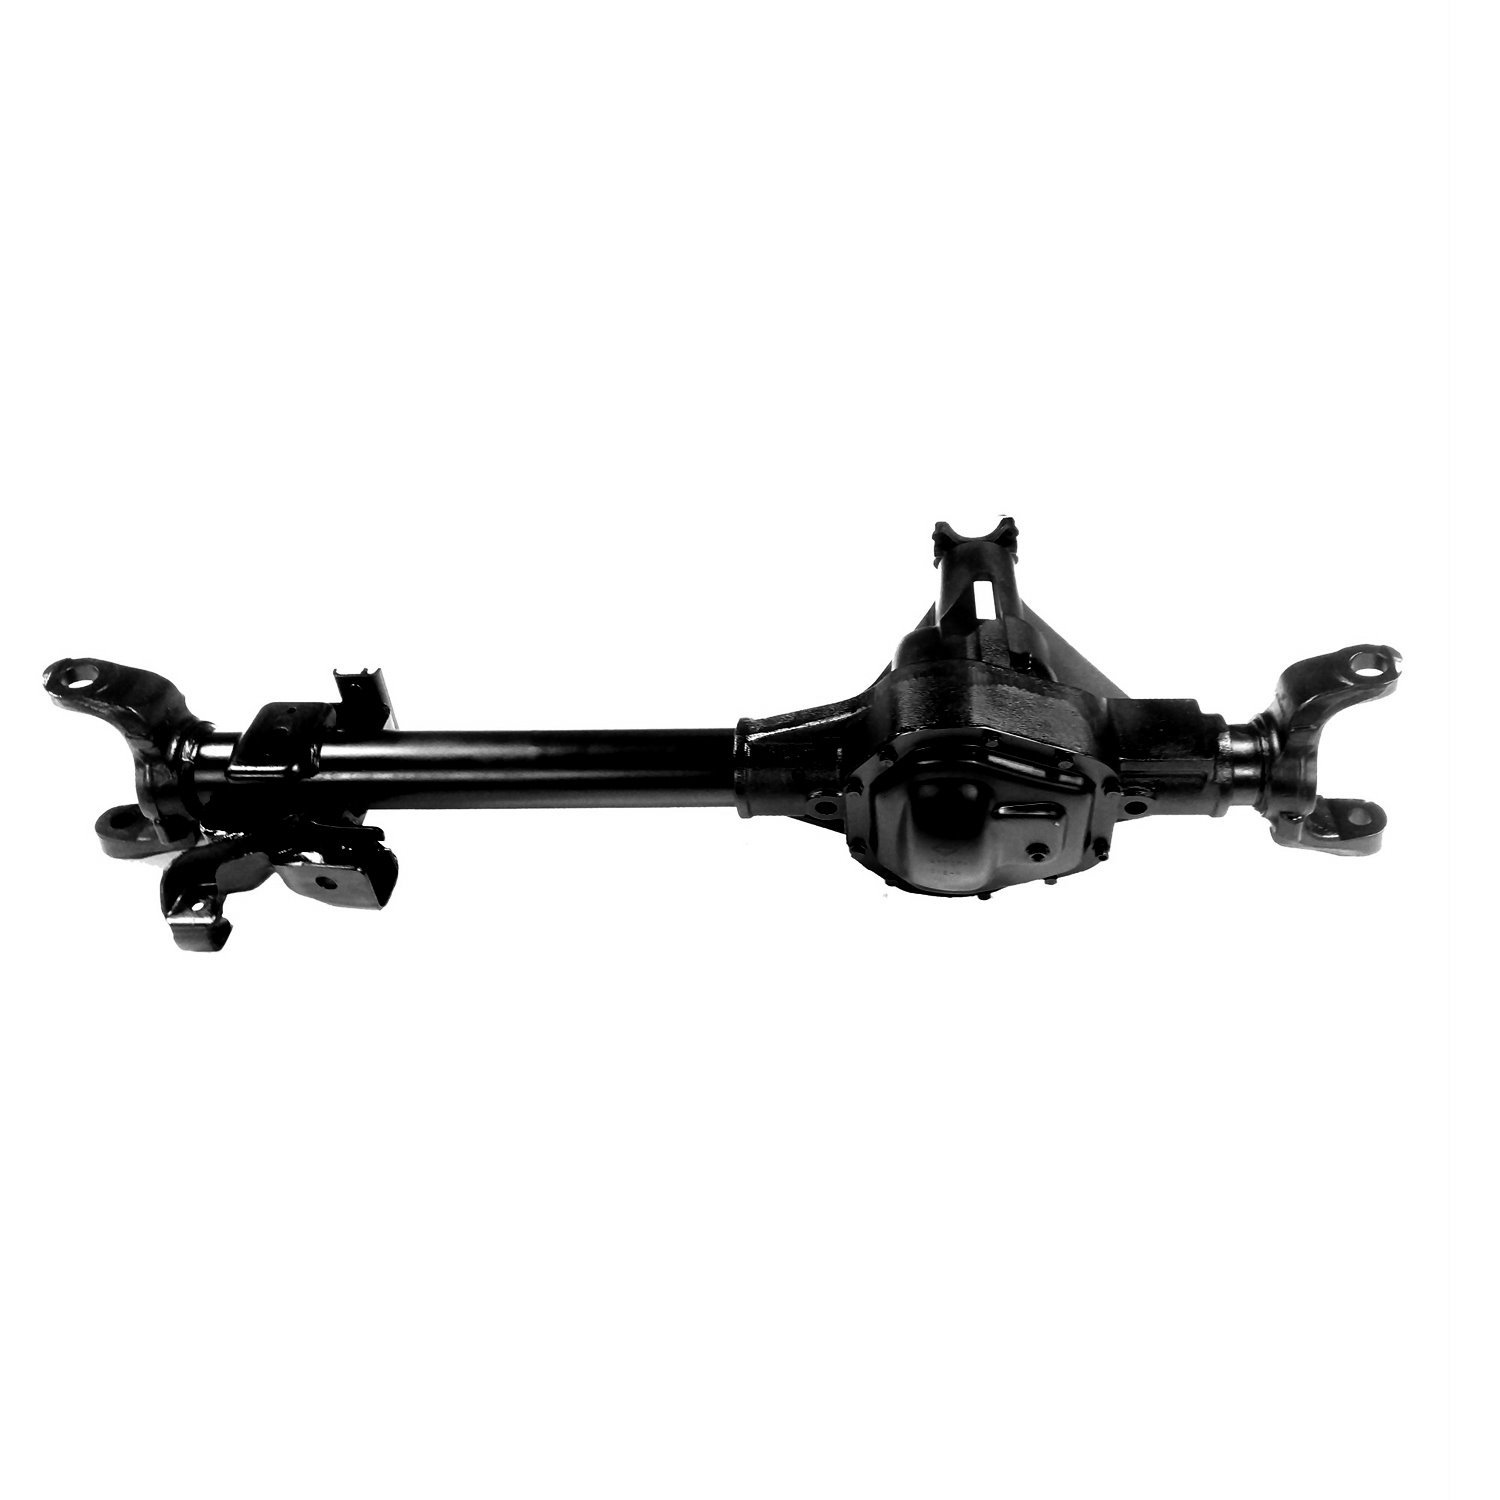 Remanufactured Complete Axle Assembly for Dana 60 11-12 Ford F350 4.30, DRW, Cab Chassis